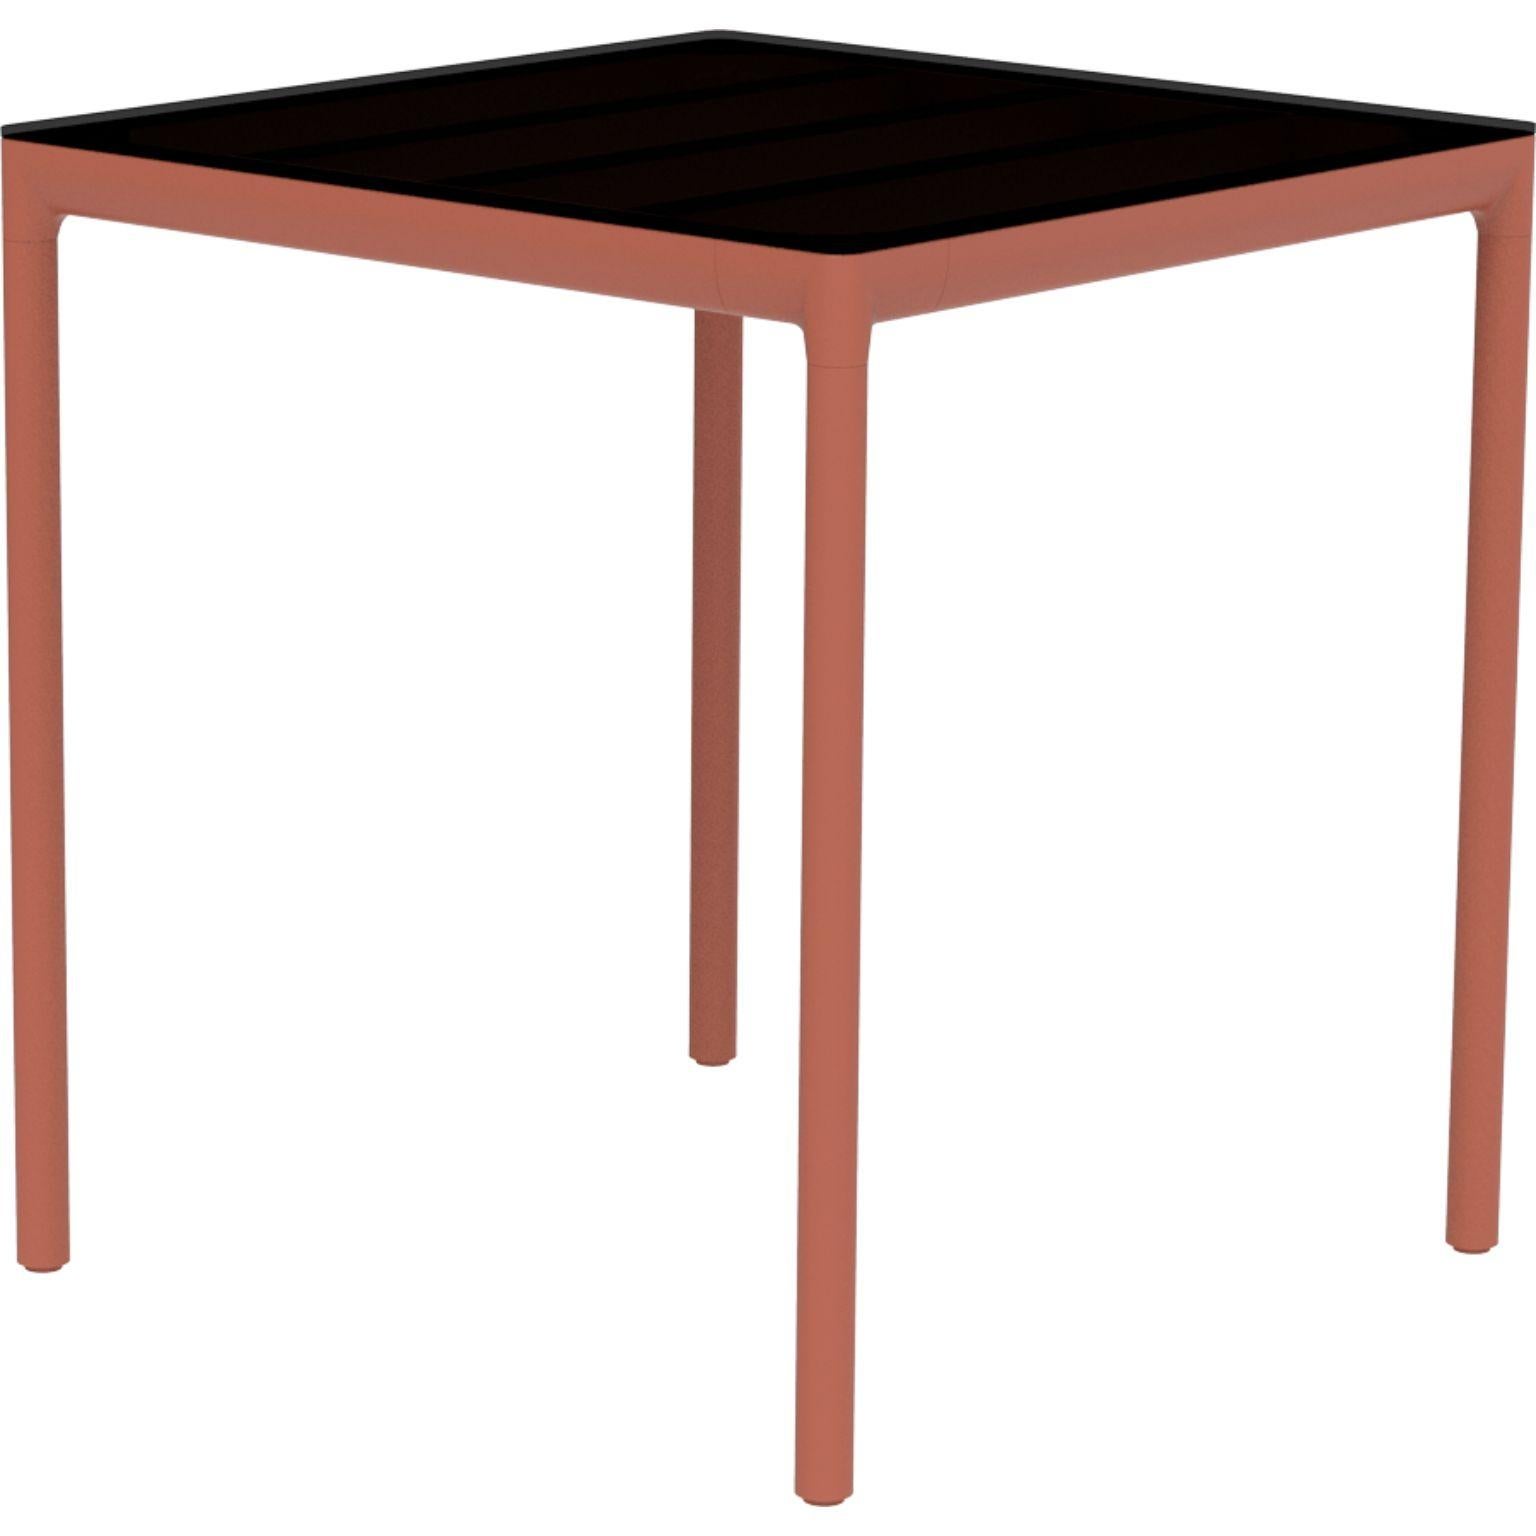 Ribbons Salmon 70 side table by MOWEE
Dimensions: D70 x W70 x H75 cm.
Material: Aluminum, HPL top.
Weight: 12 kg.
Also available in different colors and finishes. (HPL Black Edge or Neolith top).

An unmistakable collection for its beauty and